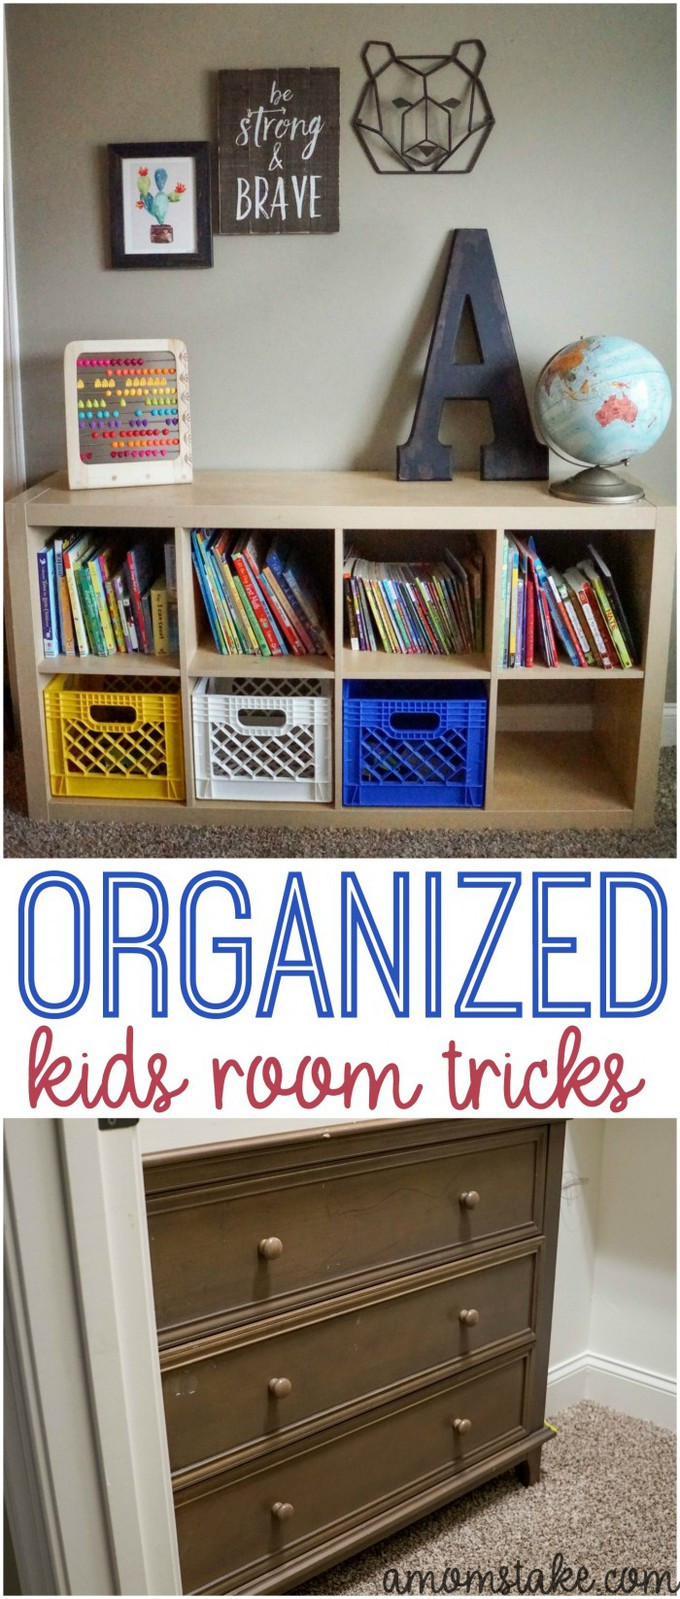 How To Organize Kids Room When It Is Small
 6 Tricks of an Organized Kids Room and how to keep it